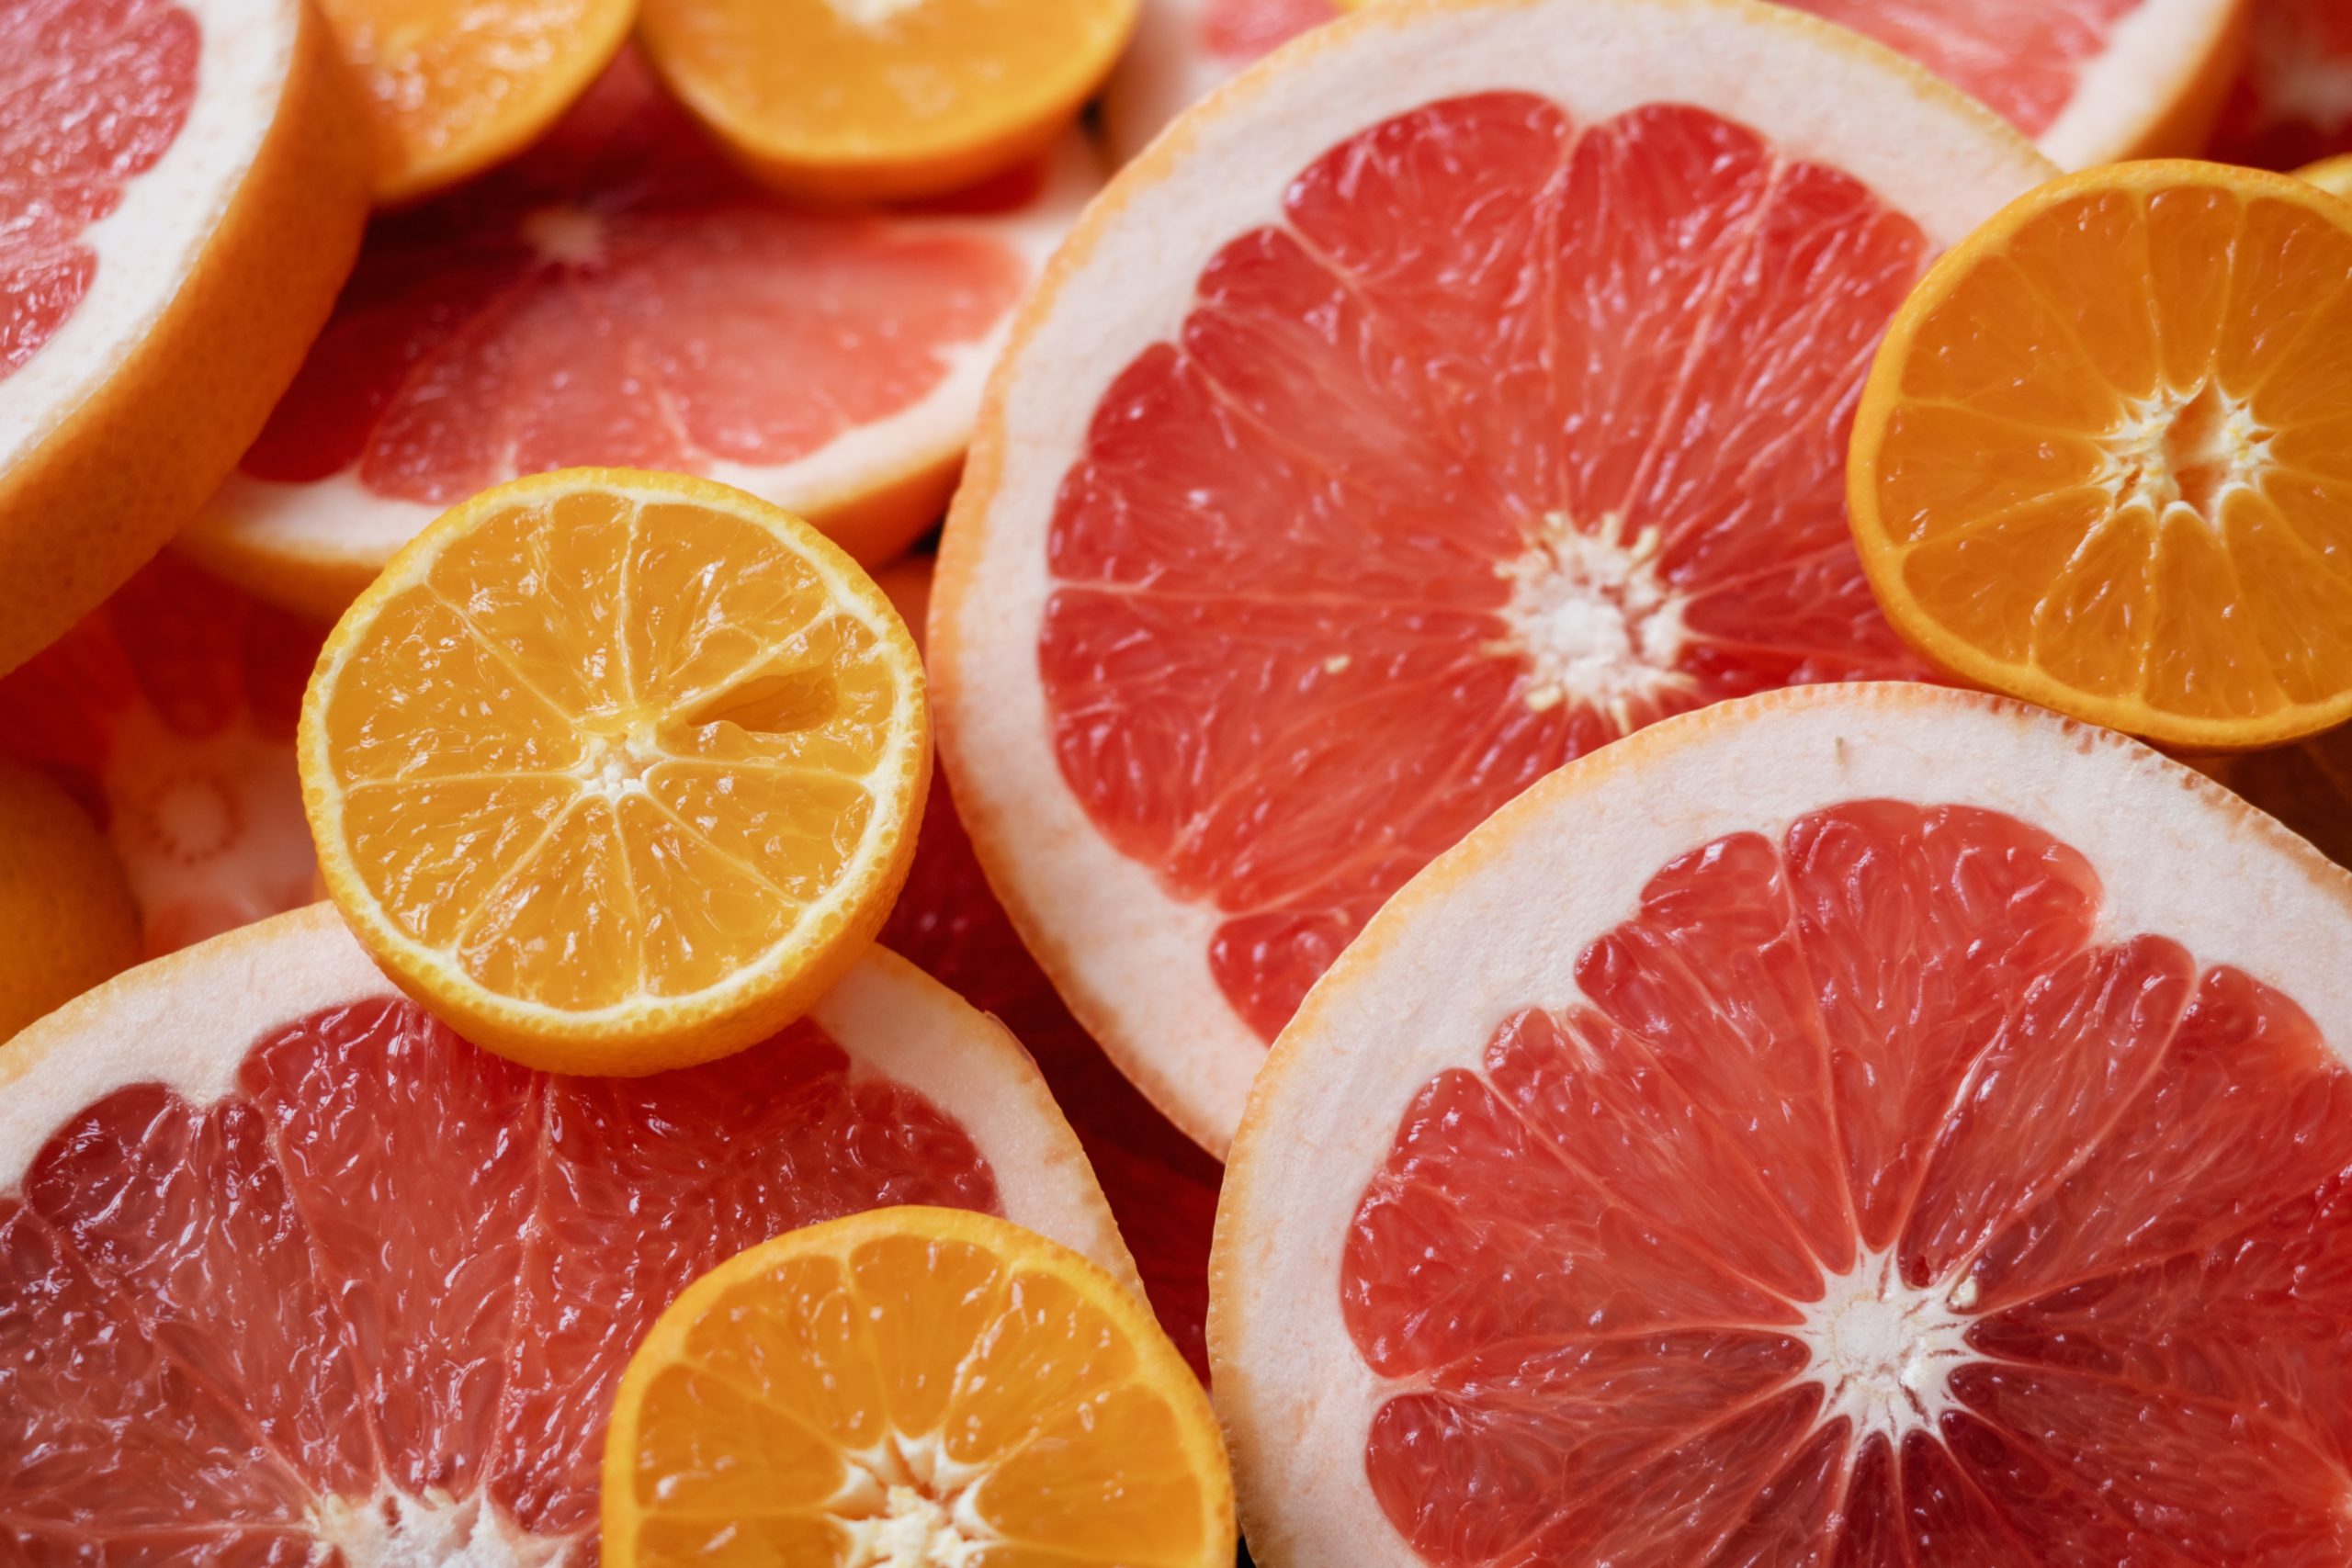 Grapefruits and oranges sliced in half. Both fruits are a great source of vitamin C which supports our immune system